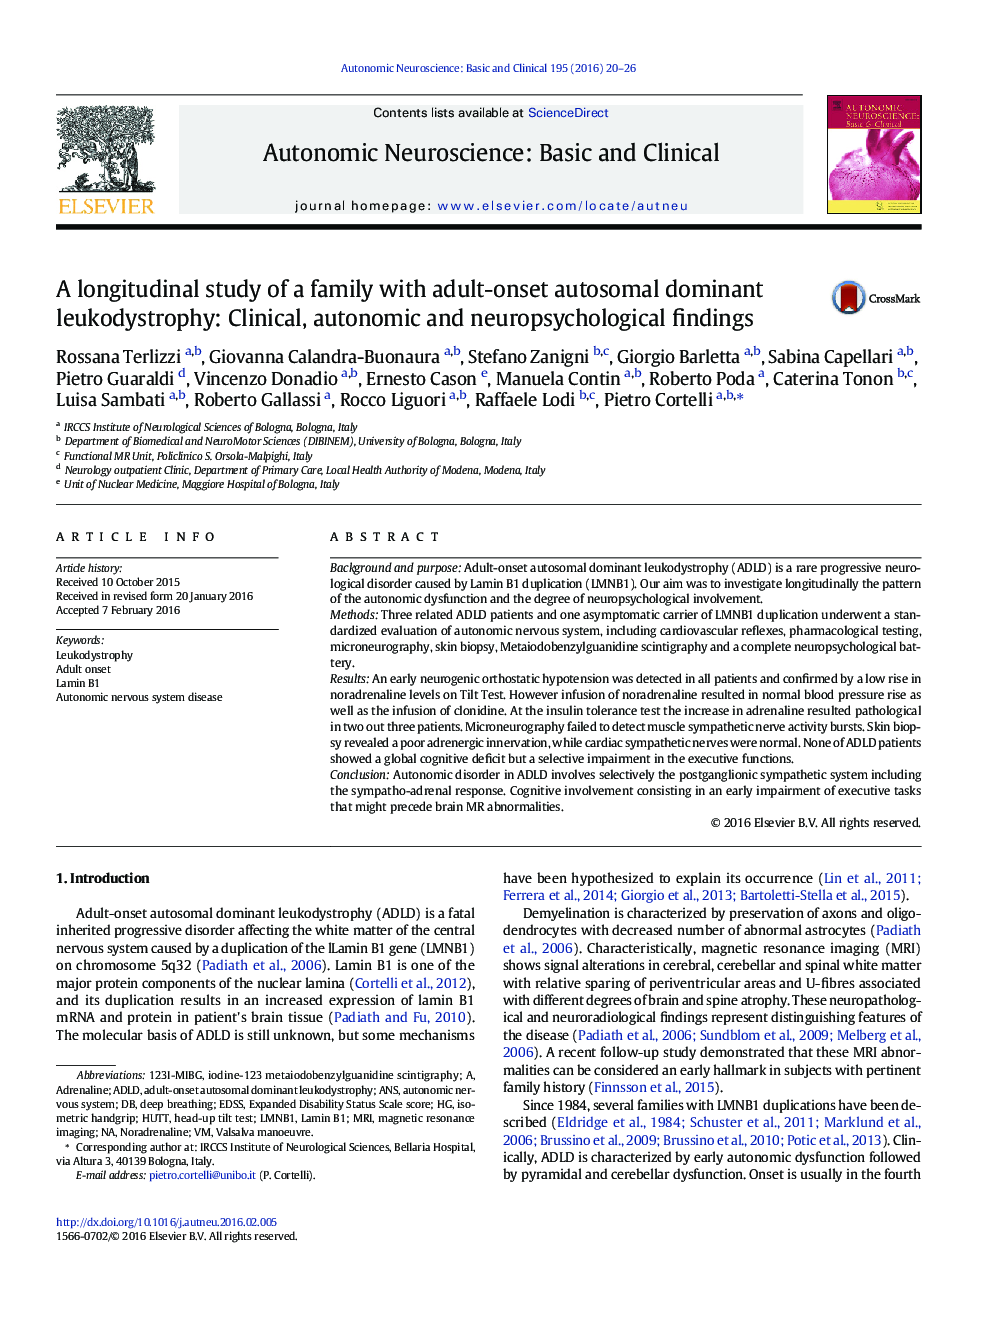 A longitudinal study of a family with adult-onset autosomal dominant leukodystrophy: Clinical, autonomic and neuropsychological findings